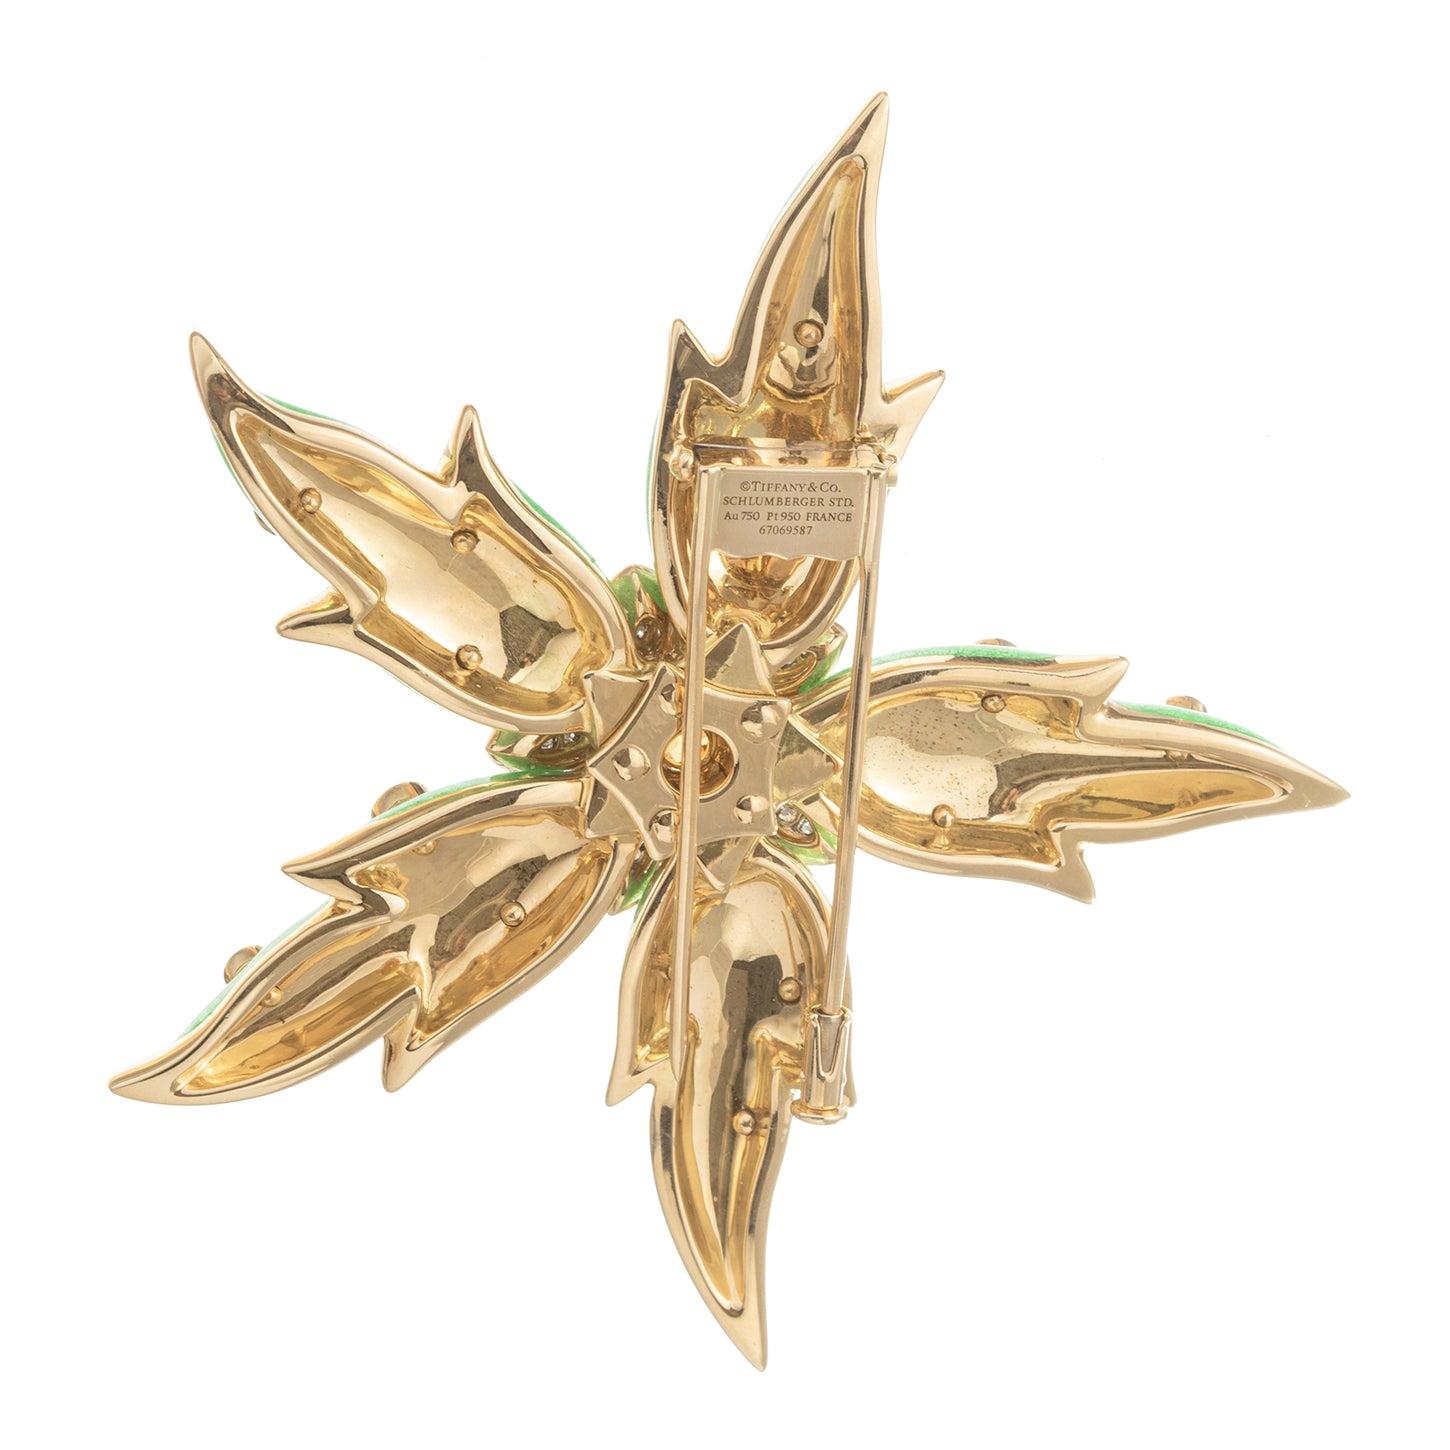 Jean Schlumberger for Tiffany starfish pin in 18k yellow gold, decorated in bright sea foam green enamel with round-cut spessartite garnet accents and centering a larger round-cut spessartite garnet surrounded by pear-shaped tanzanites and round